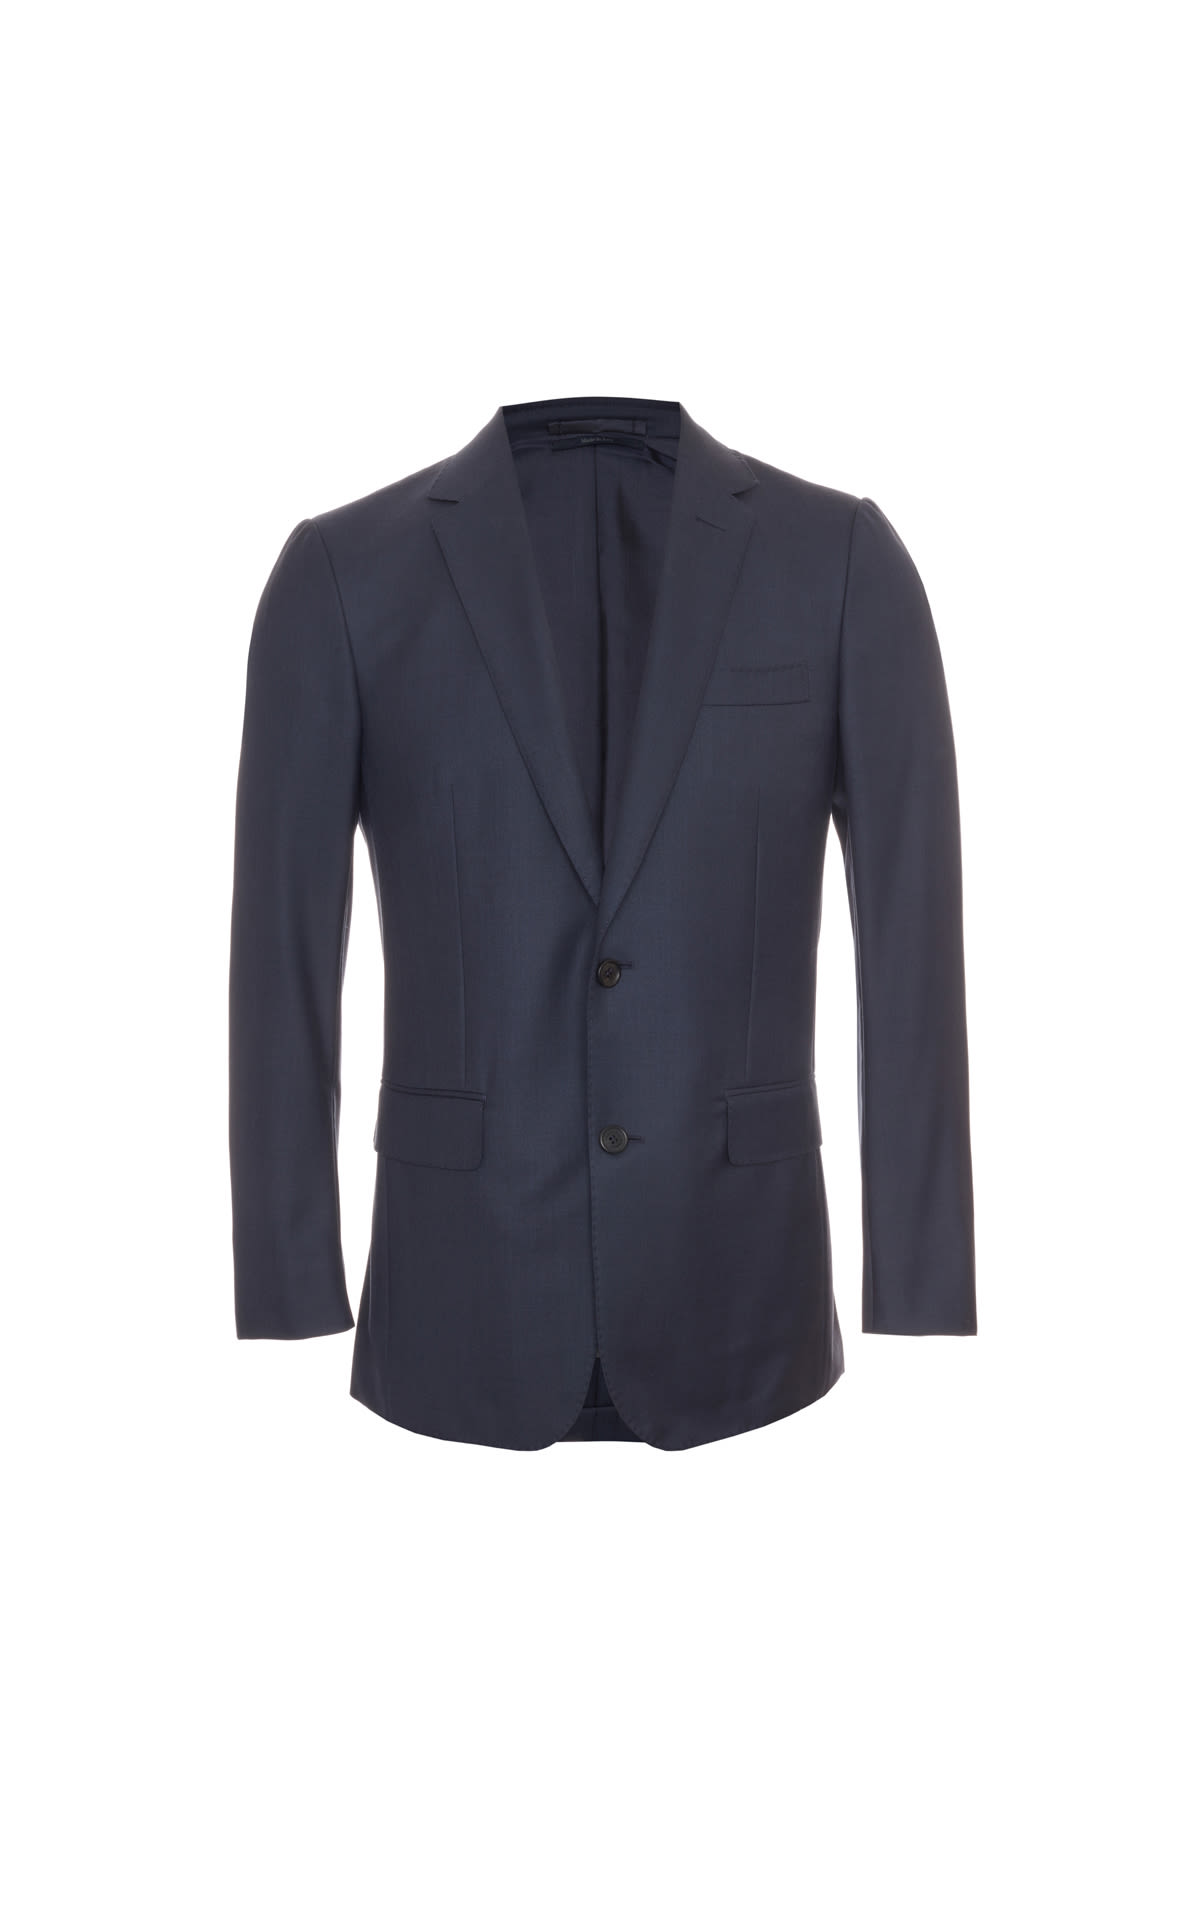 dunhill Suit jacket and trouser set from Bicester Village